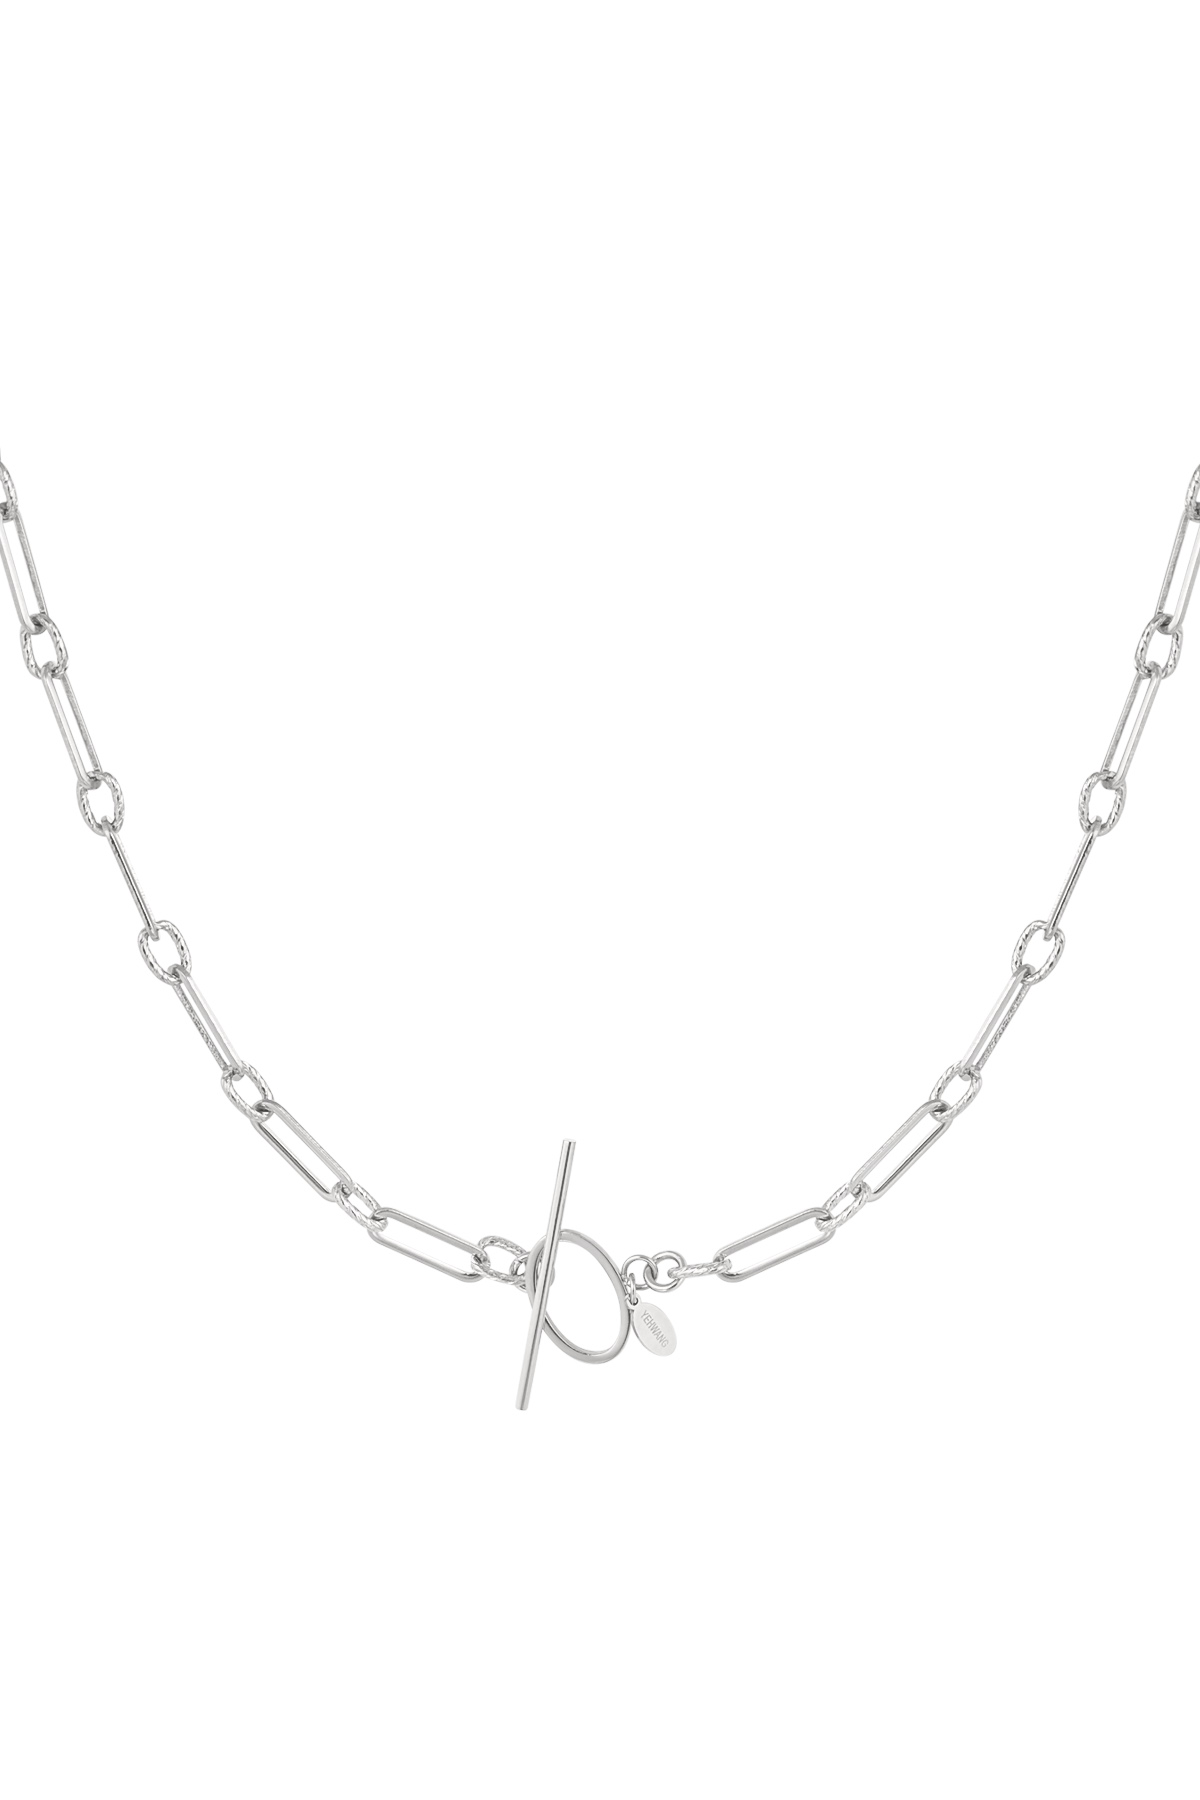 Link chain thin with round closure - silver